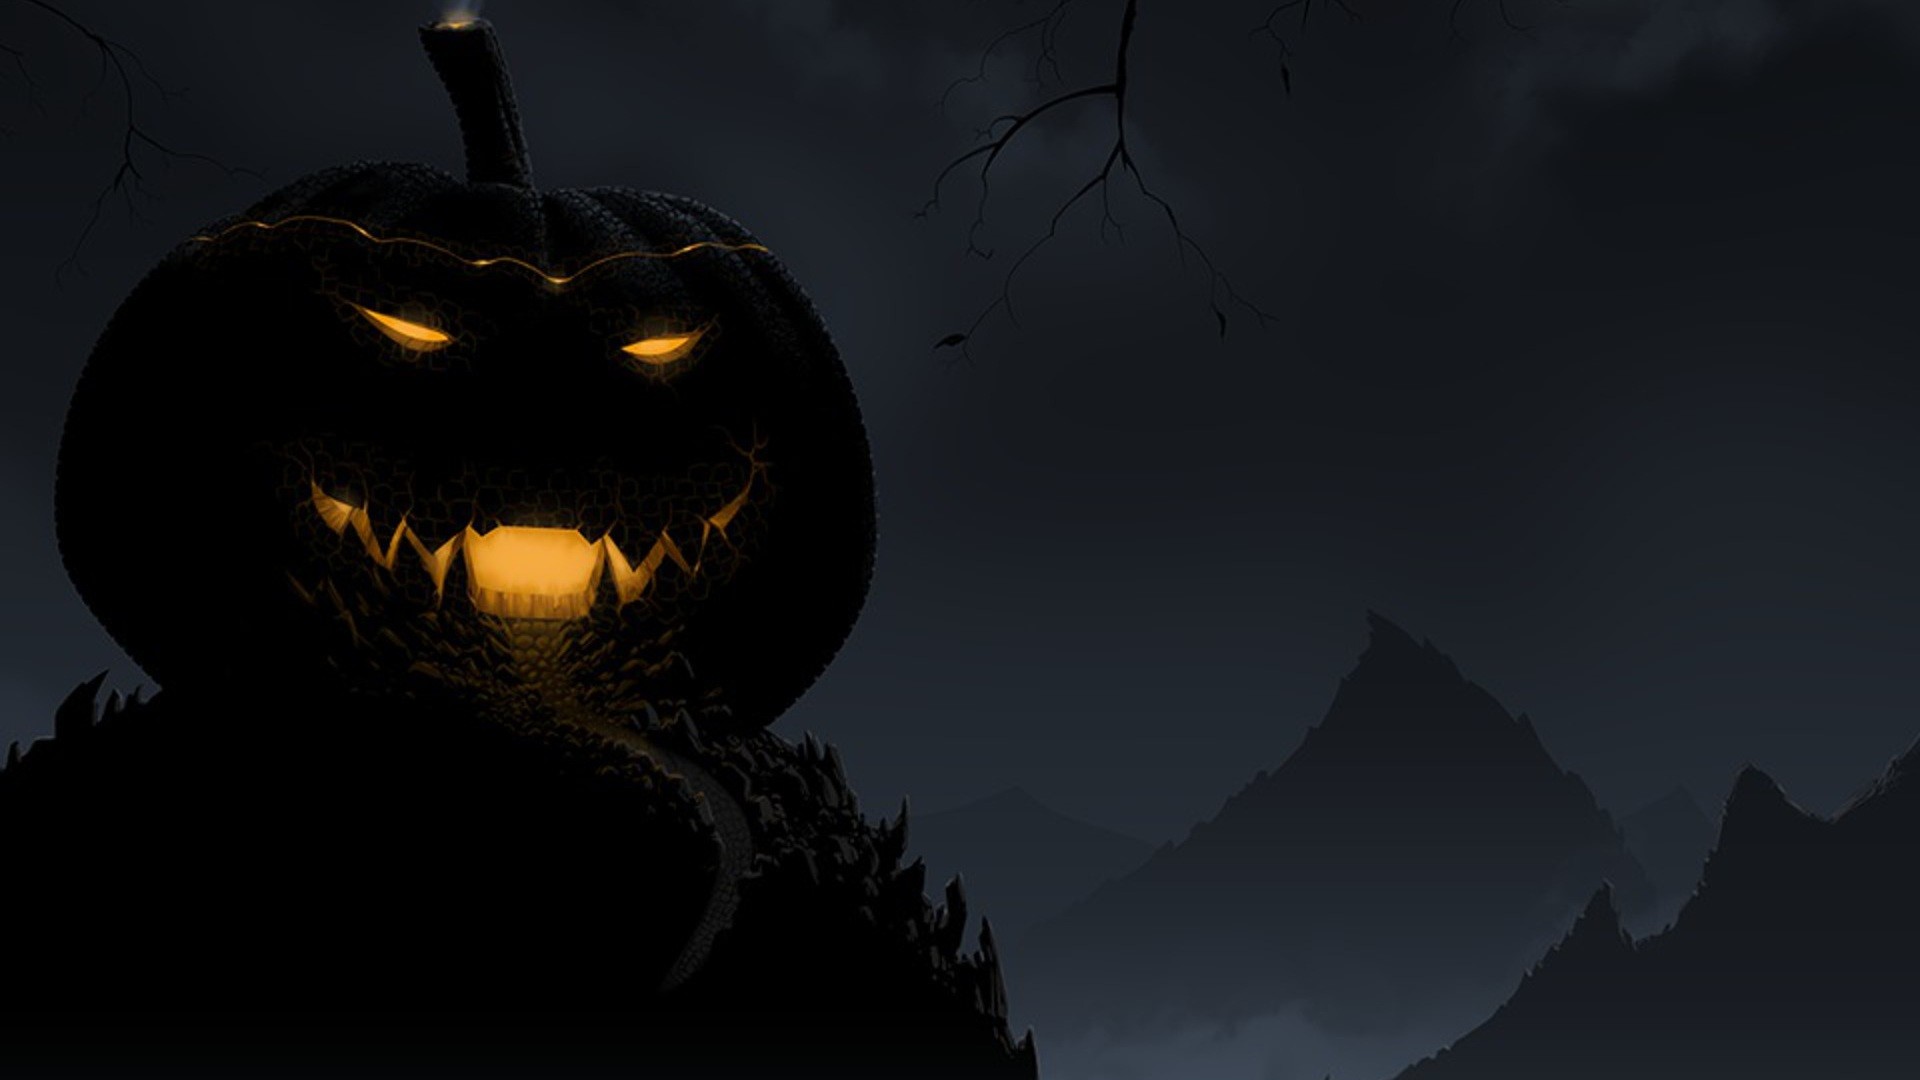 1920x1080 Cool Halloween Backgrounds - Wallpapers Browse. Cool Halloween Backgrounds  Wallpapers Browse